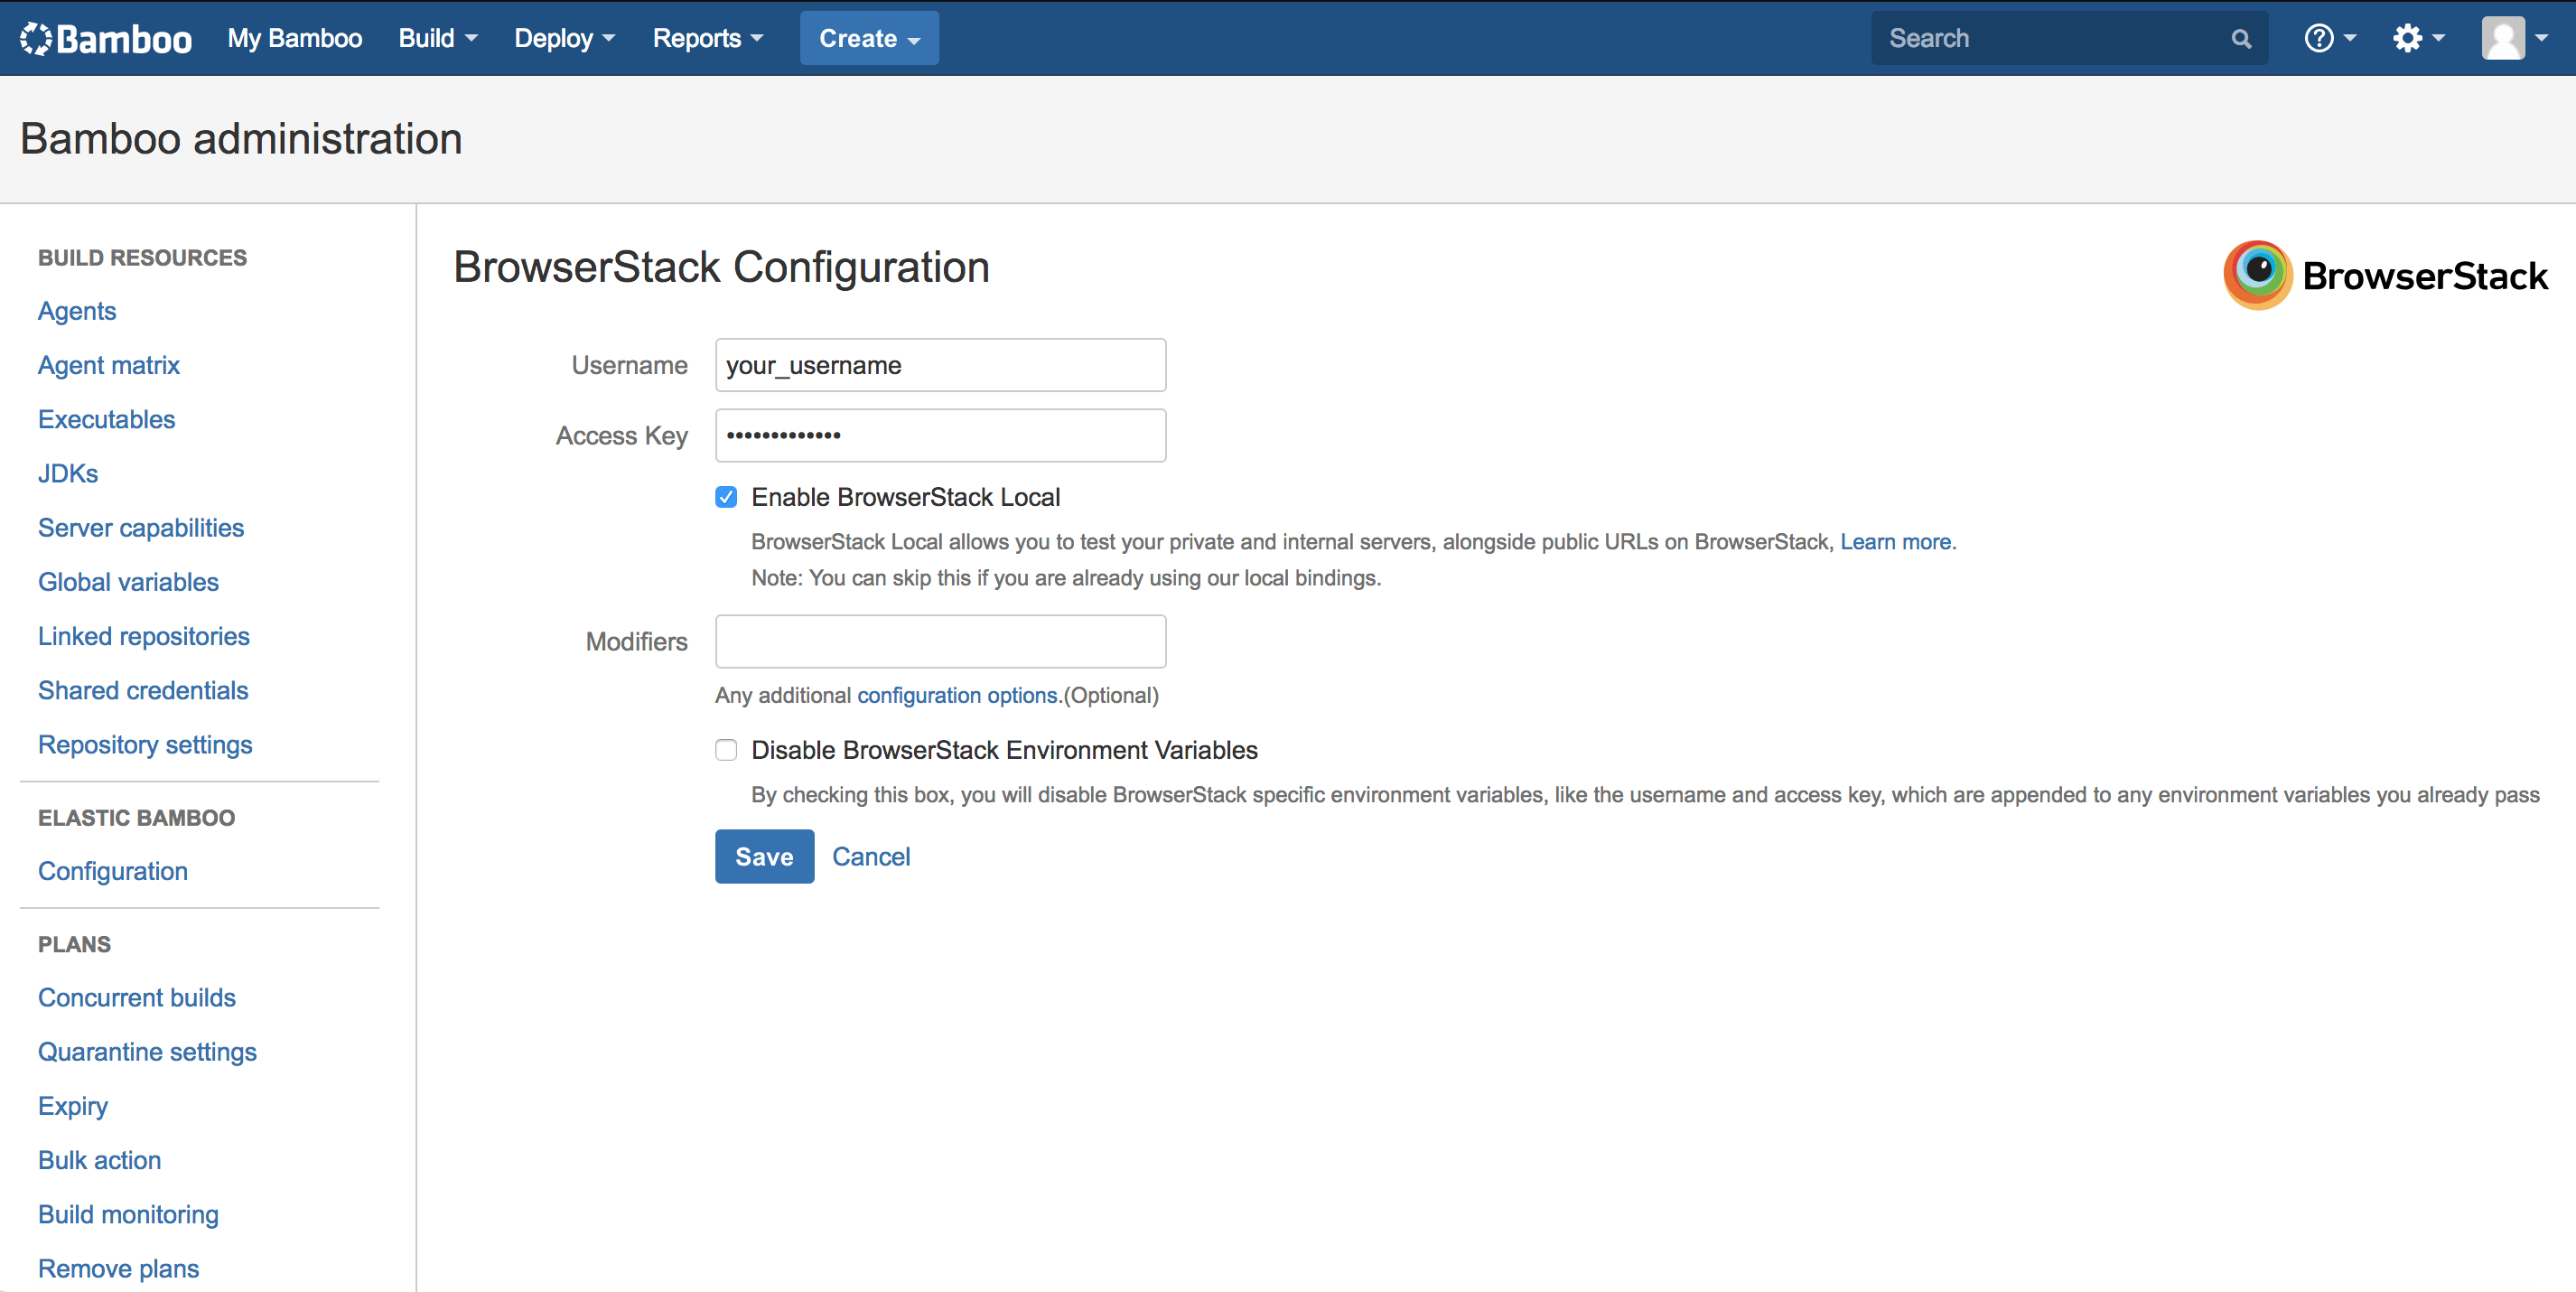 BrowserStack Configuration in Bamboo Administration